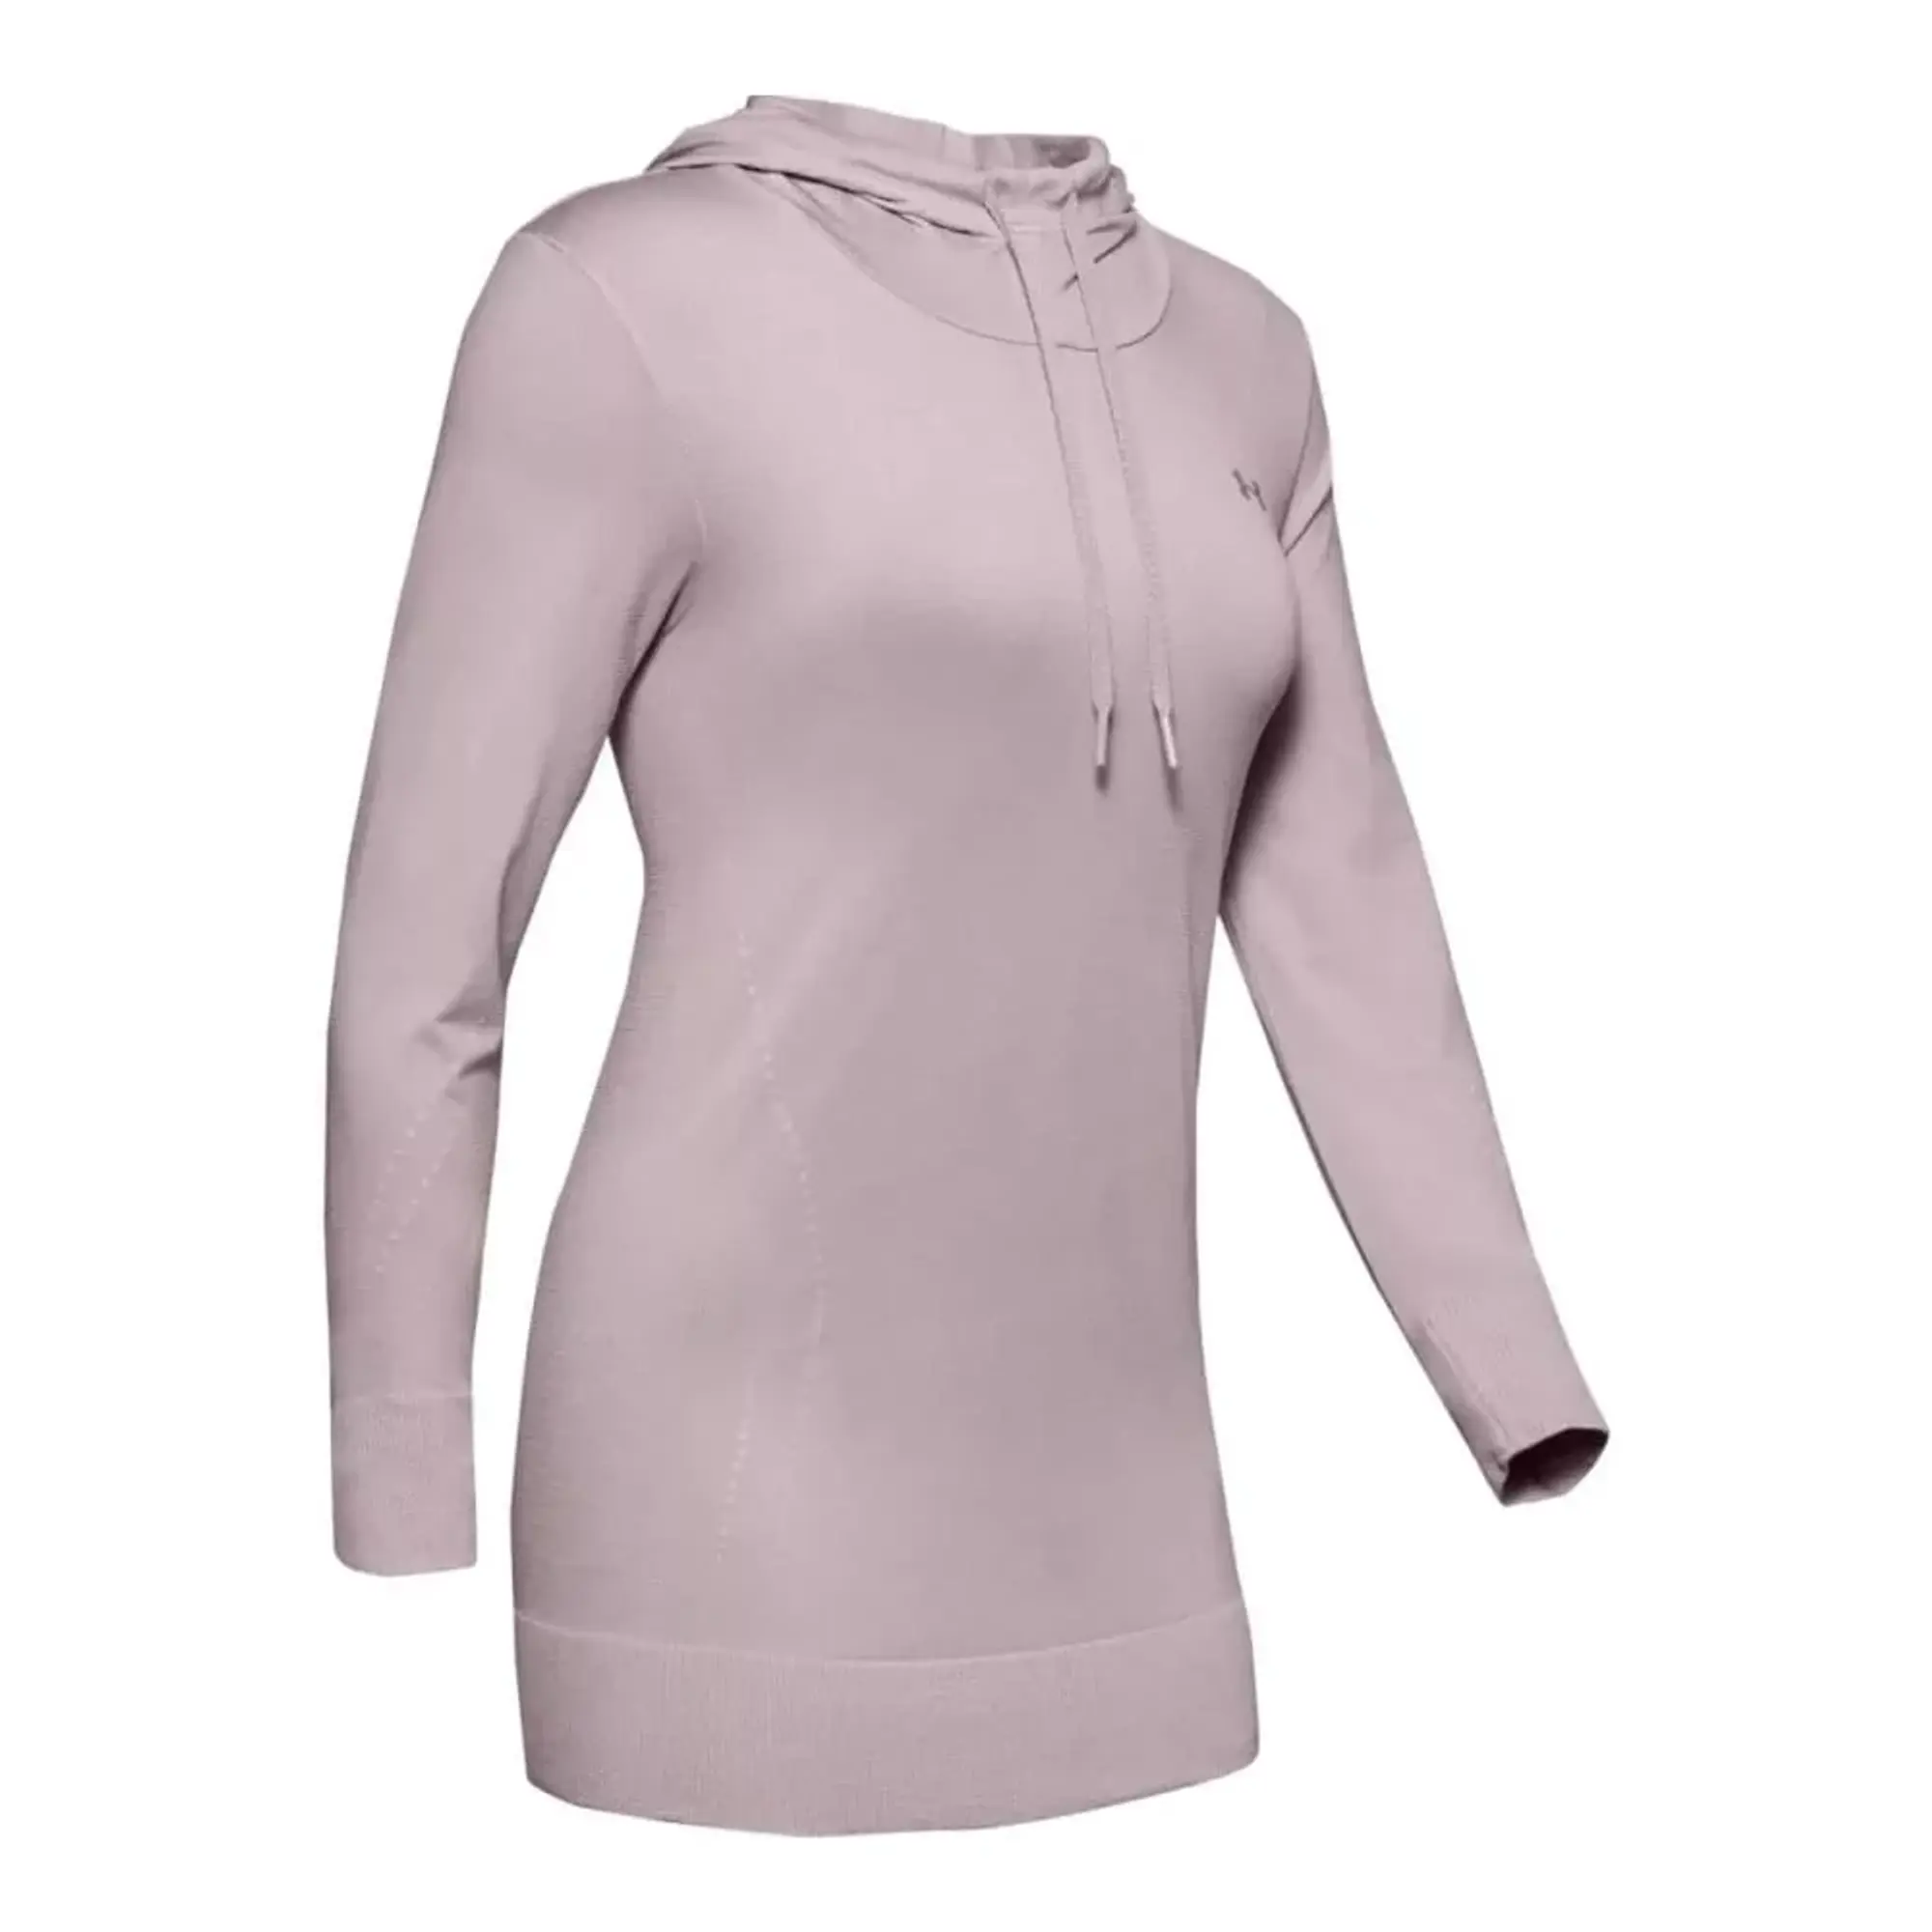 Under Armour Seamless Womens Hoodie Pink - L